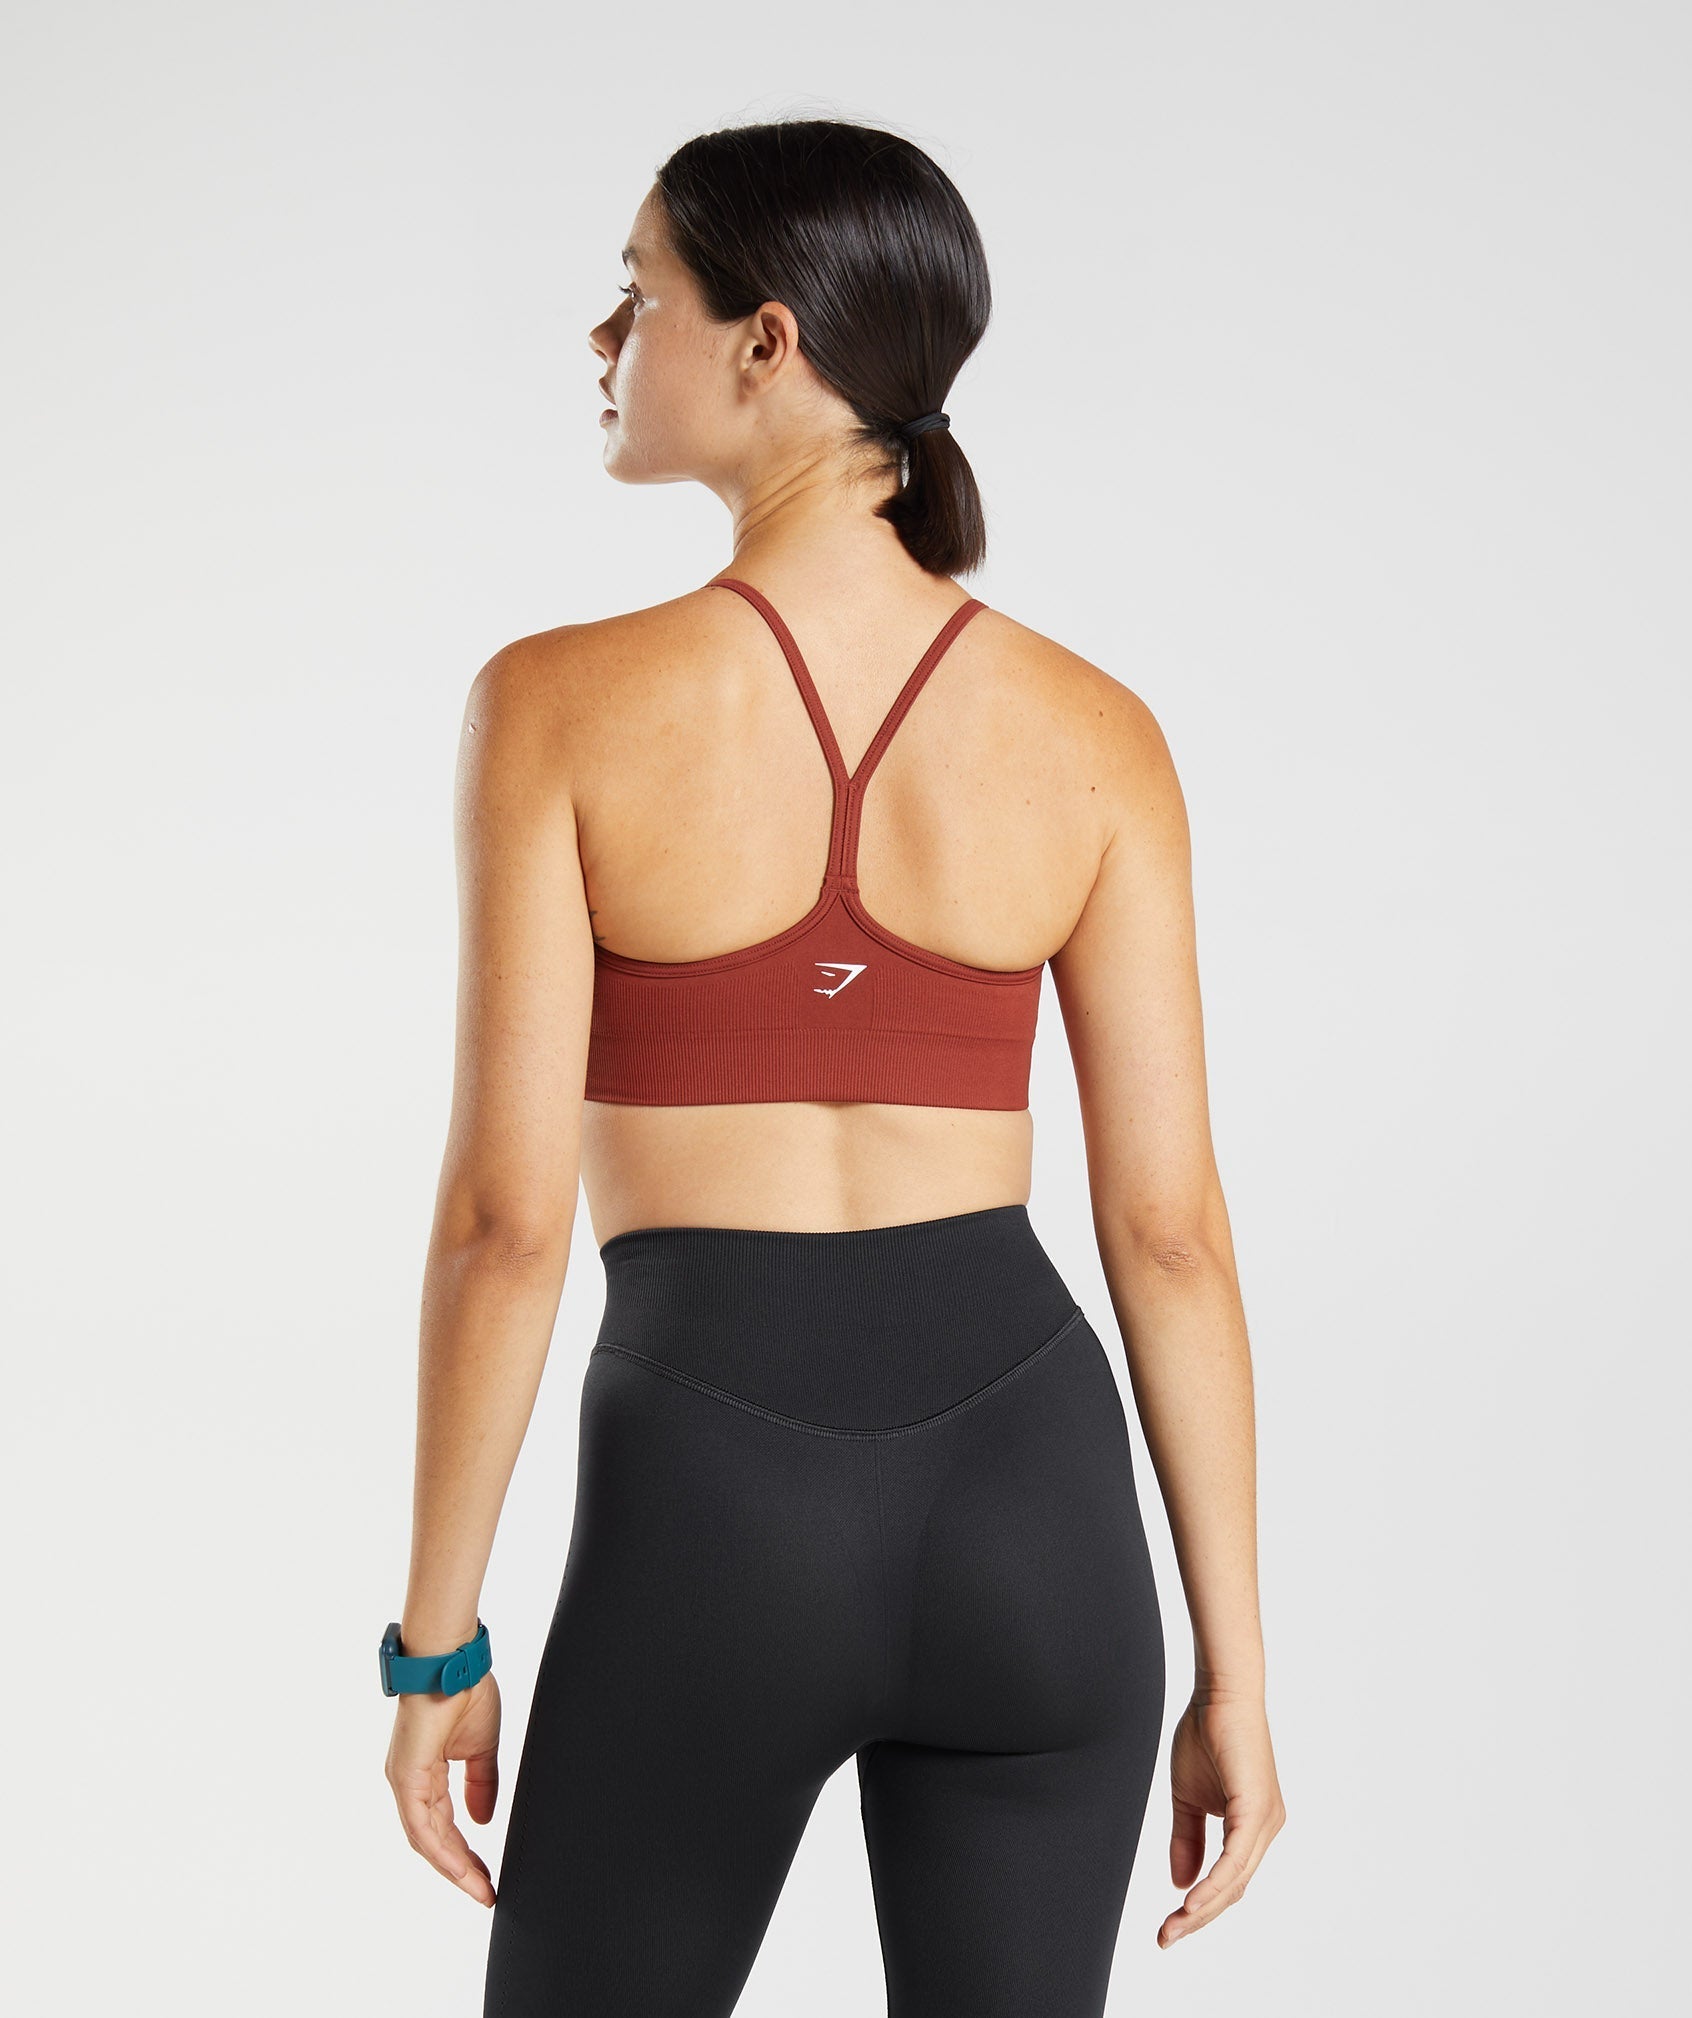 Sweat Seamless Sports Bra in Rosewood Red - view 3